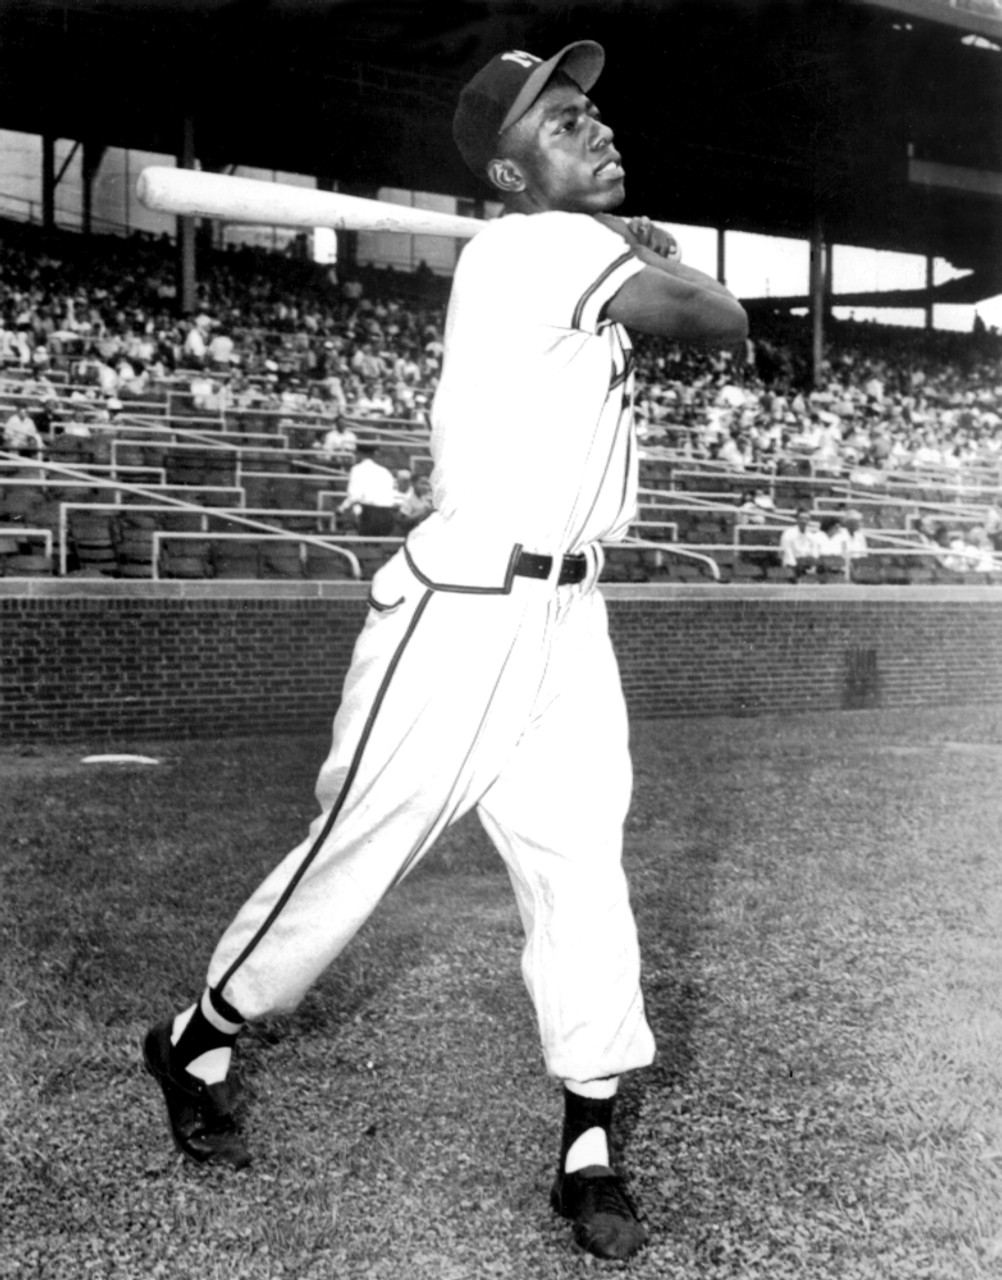 The Library of Congress - Hank Aaron, Milwaukee Braves right